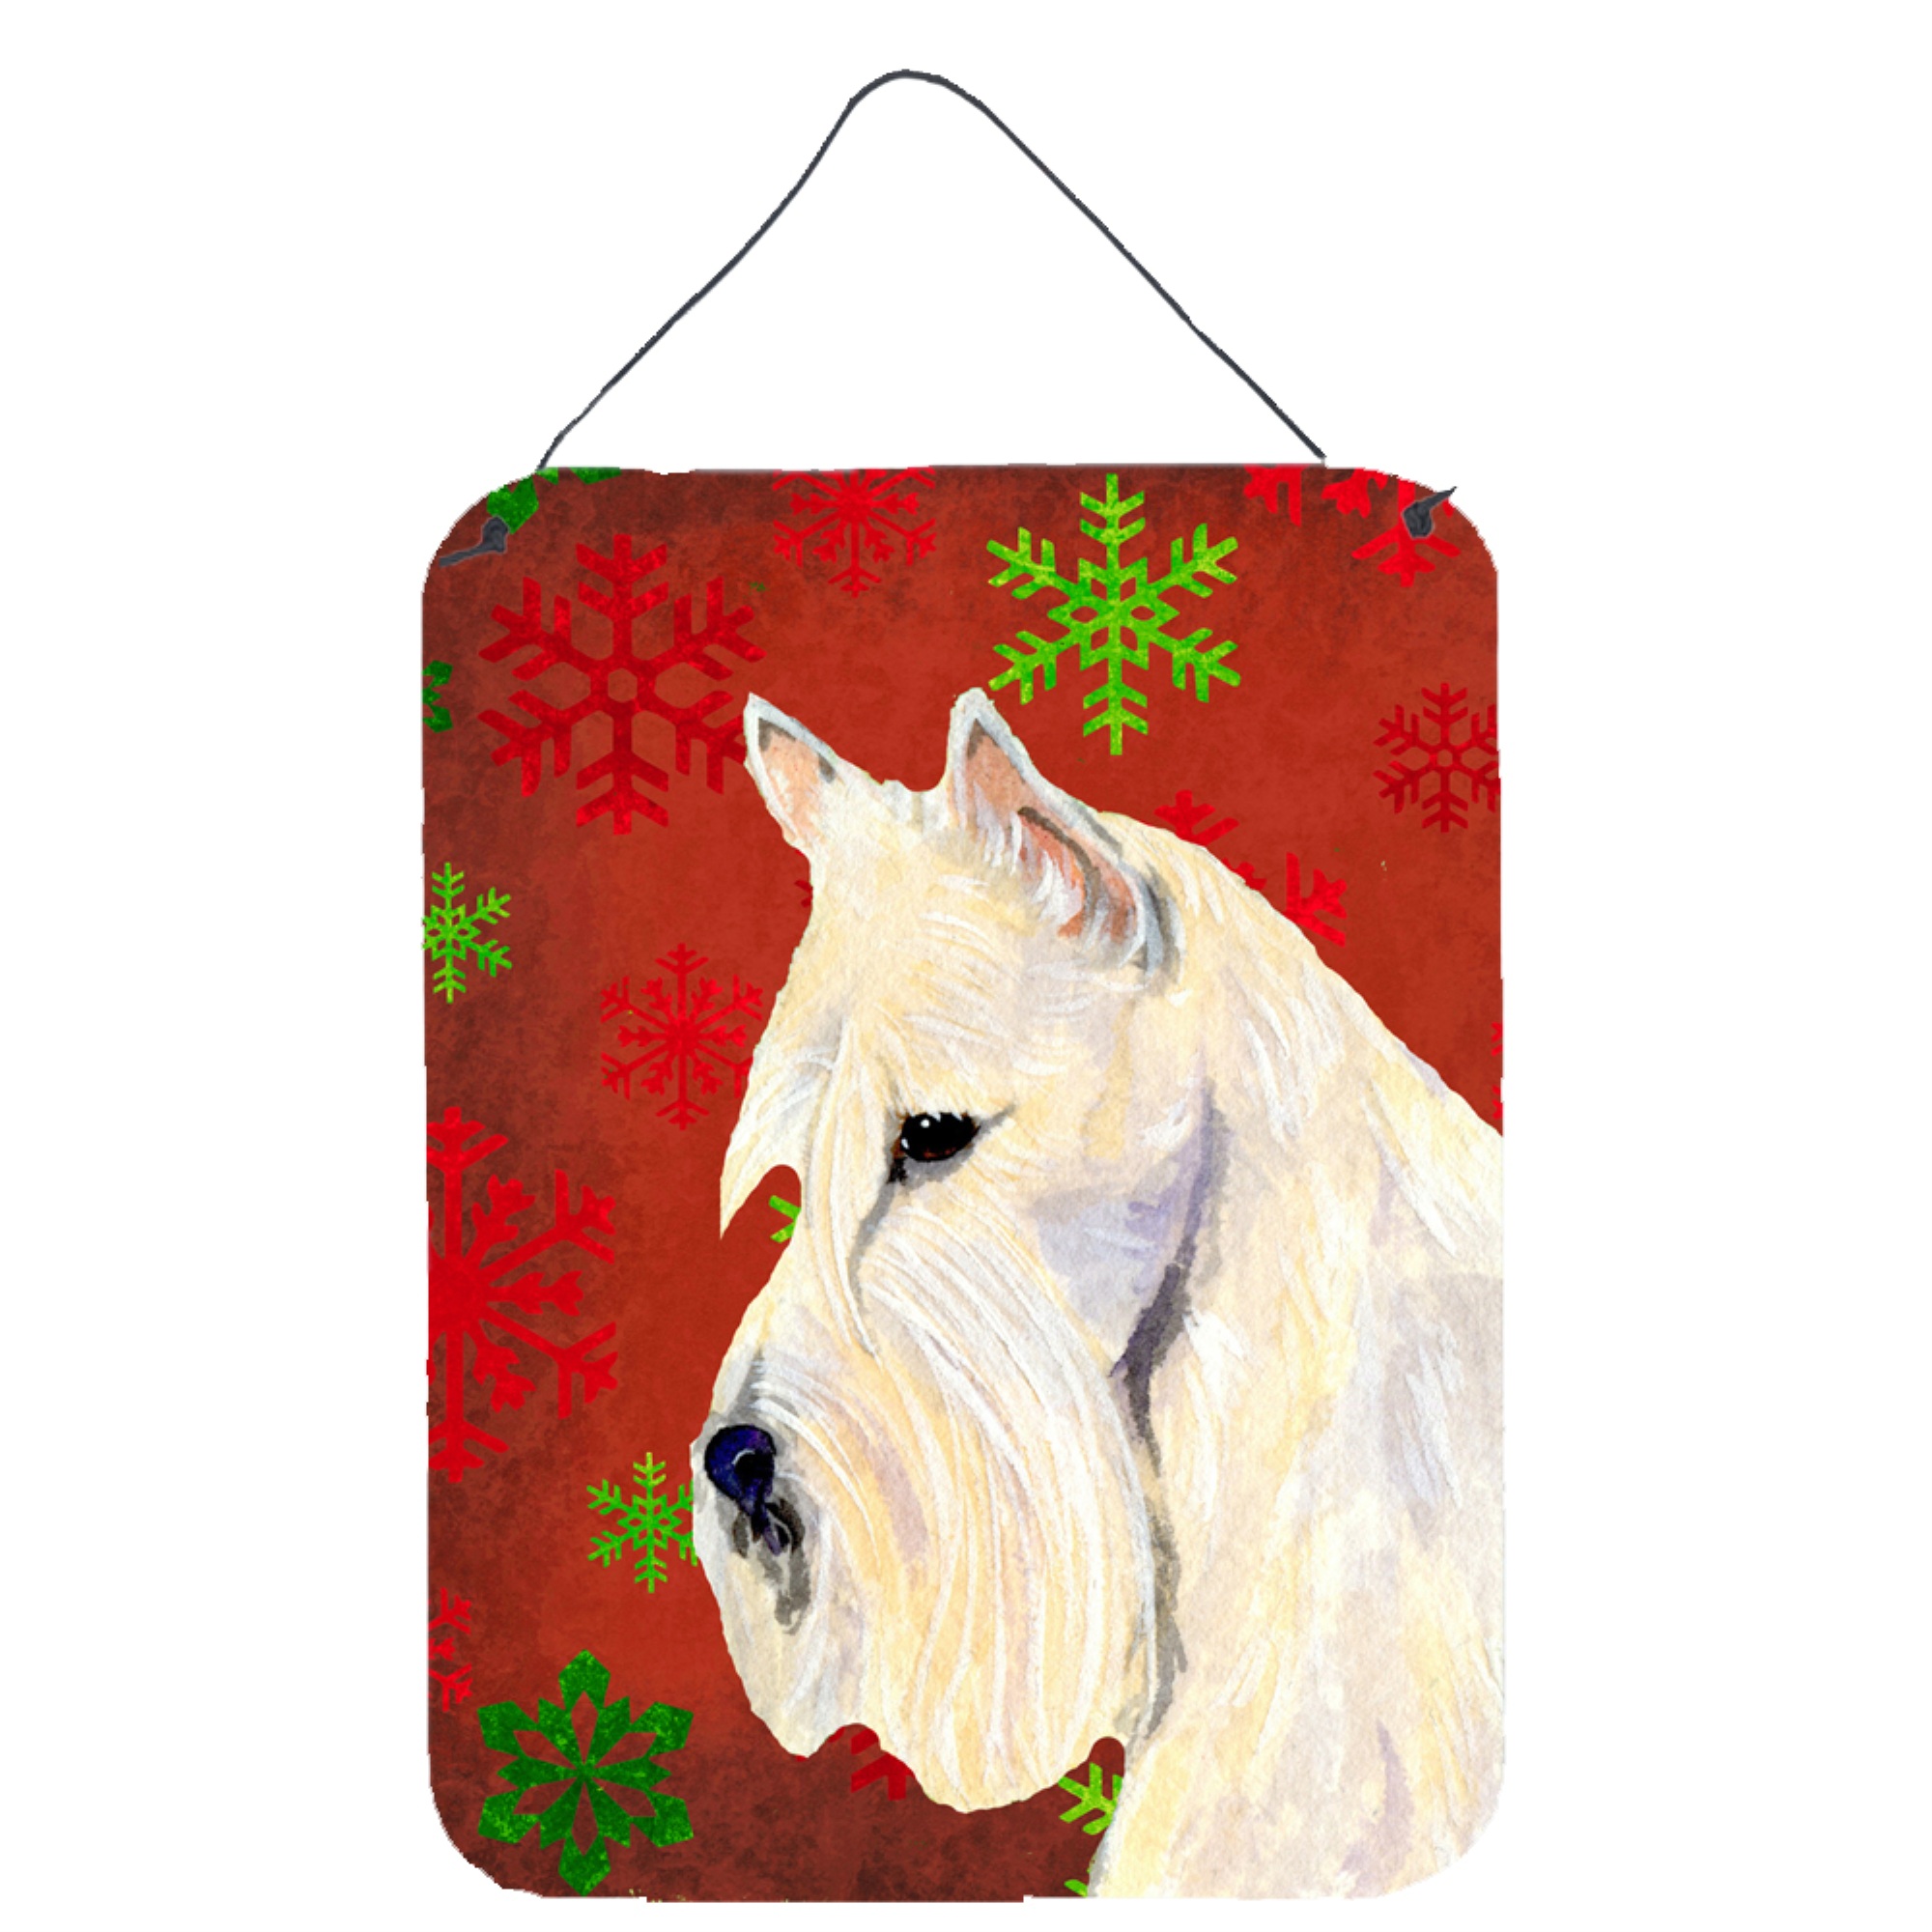 Caroline's Treasures SS4737DS1216 Scottish Terrier Red Snowflakes Holiday Christmas Wall or Door Hanging Prints, 16 x 12, Multic